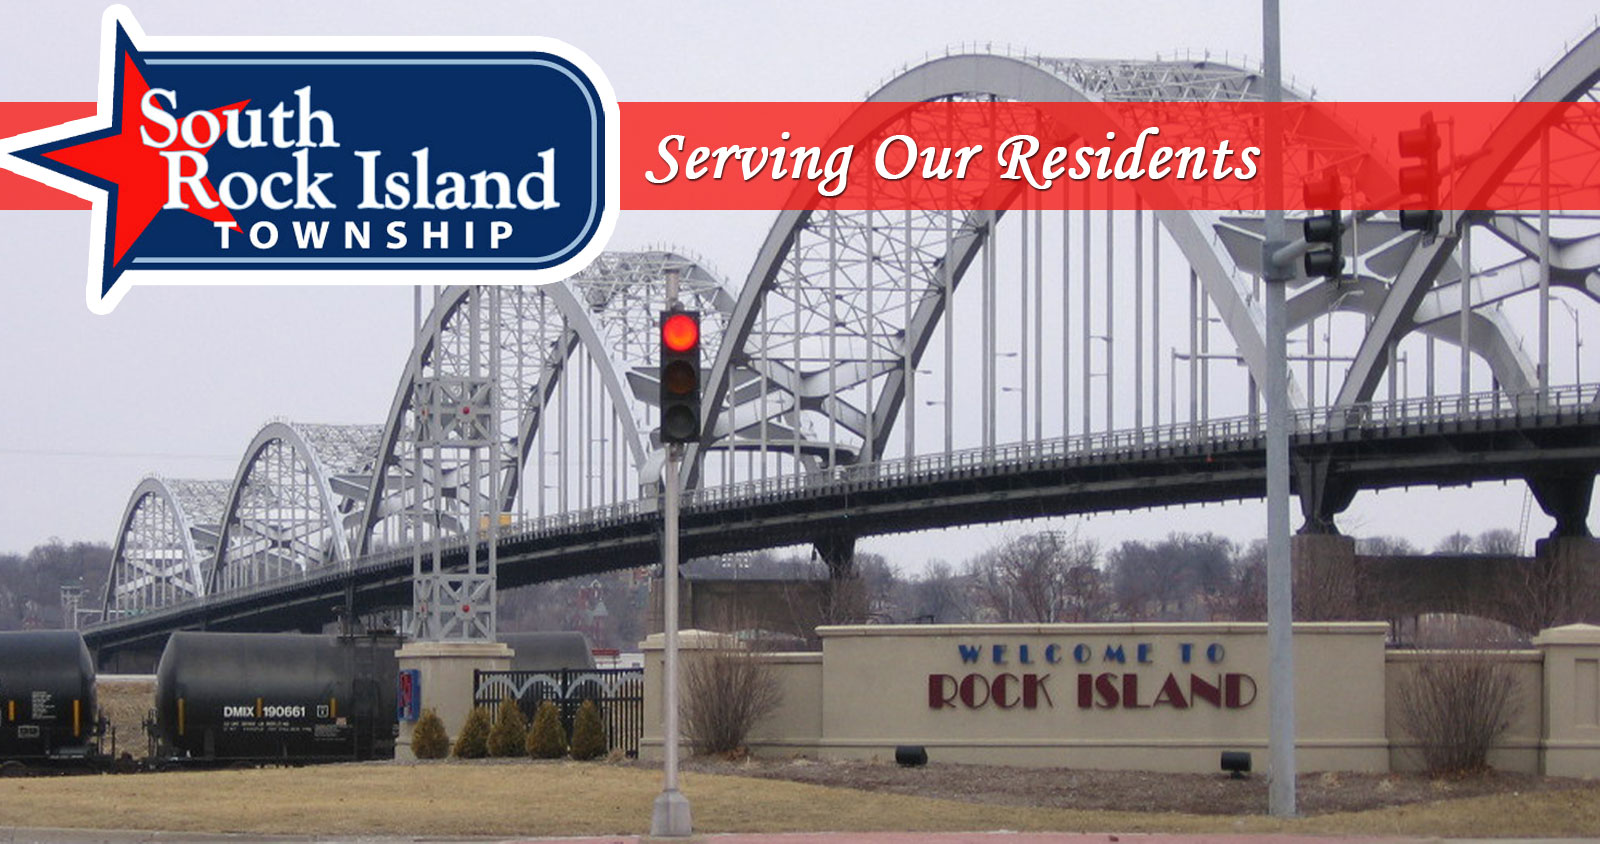 Large picture of Centennial bridge with South Rock Island Towship Logo and the phrase Serving Our Residents at the top